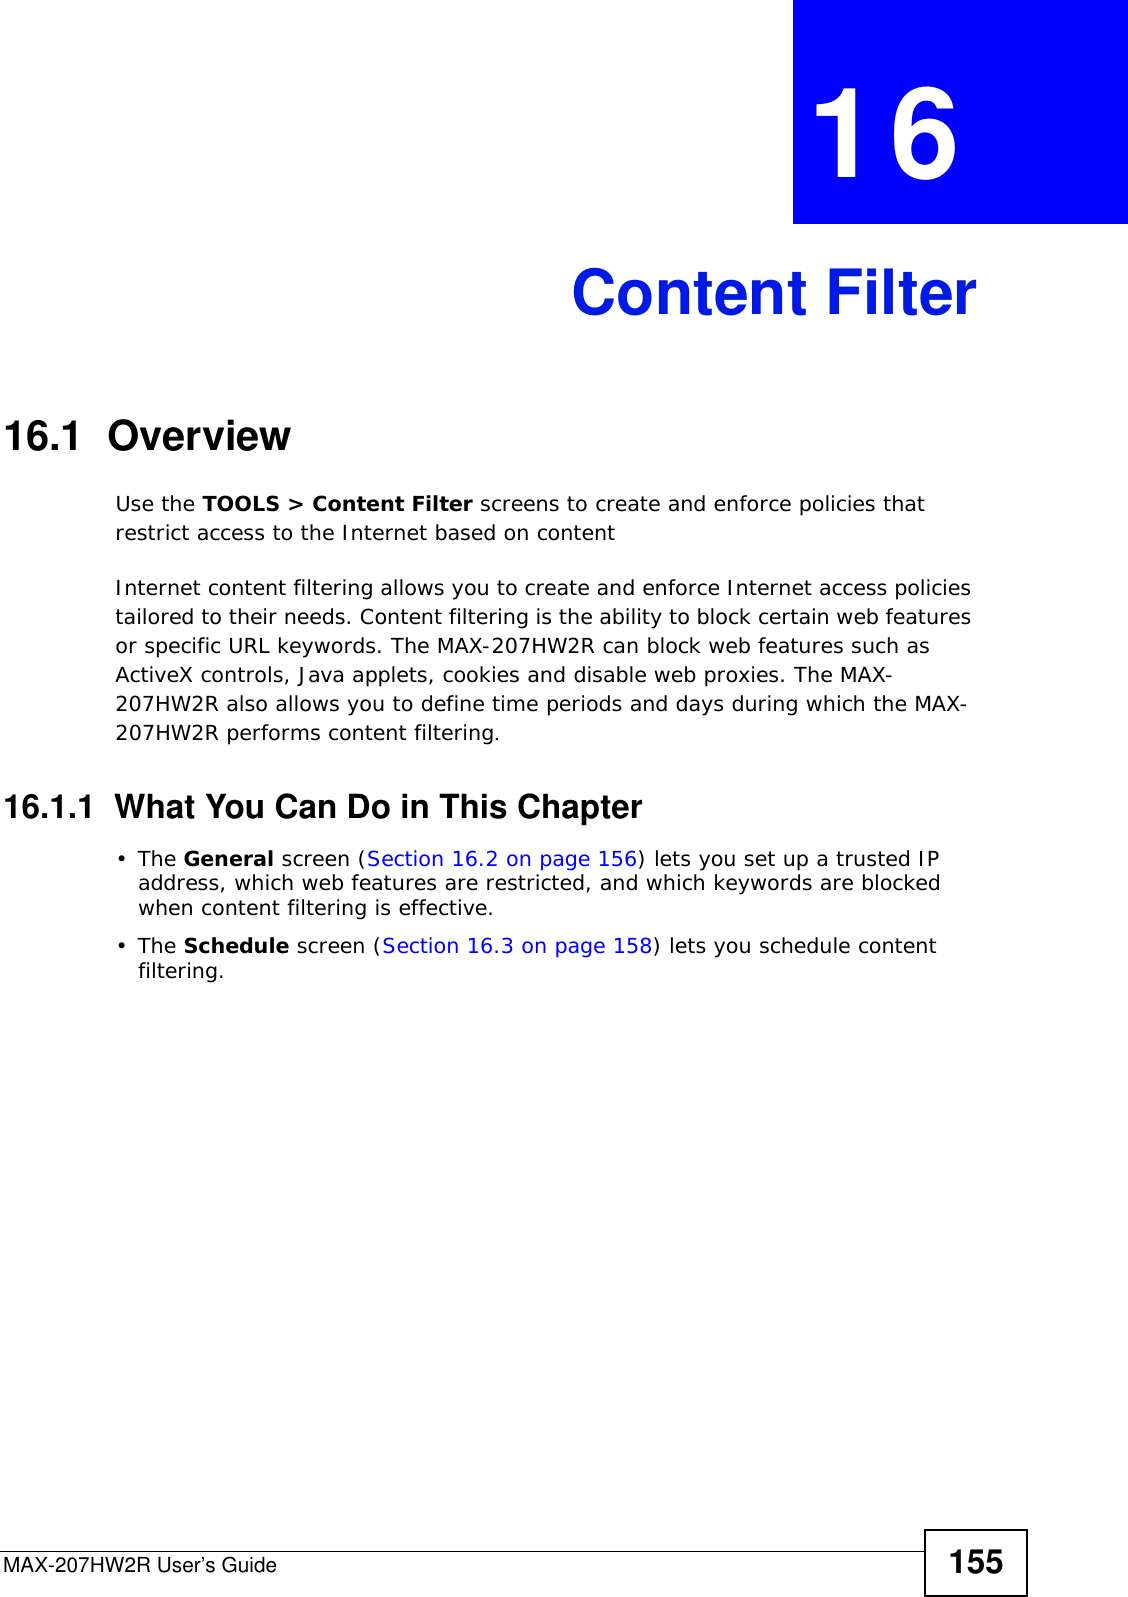 MAX-207HW2R User’s Guide 155CHAPTER  16 Content Filter16.1  OverviewUse the TOOLS &gt; Content Filter screens to create and enforce policies that restrict access to the Internet based on contentInternet content filtering allows you to create and enforce Internet access policies tailored to their needs. Content filtering is the ability to block certain web features or specific URL keywords. The MAX-207HW2R can block web features such as ActiveX controls, Java applets, cookies and disable web proxies. The MAX-207HW2R also allows you to define time periods and days during which the MAX-207HW2R performs content filtering.16.1.1  What You Can Do in This Chapter•The General screen (Section 16.2 on page 156) lets you set up a trusted IP address, which web features are restricted, and which keywords are blocked when content filtering is effective.•The Schedule screen (Section 16.3 on page 158) lets you schedule content filtering.